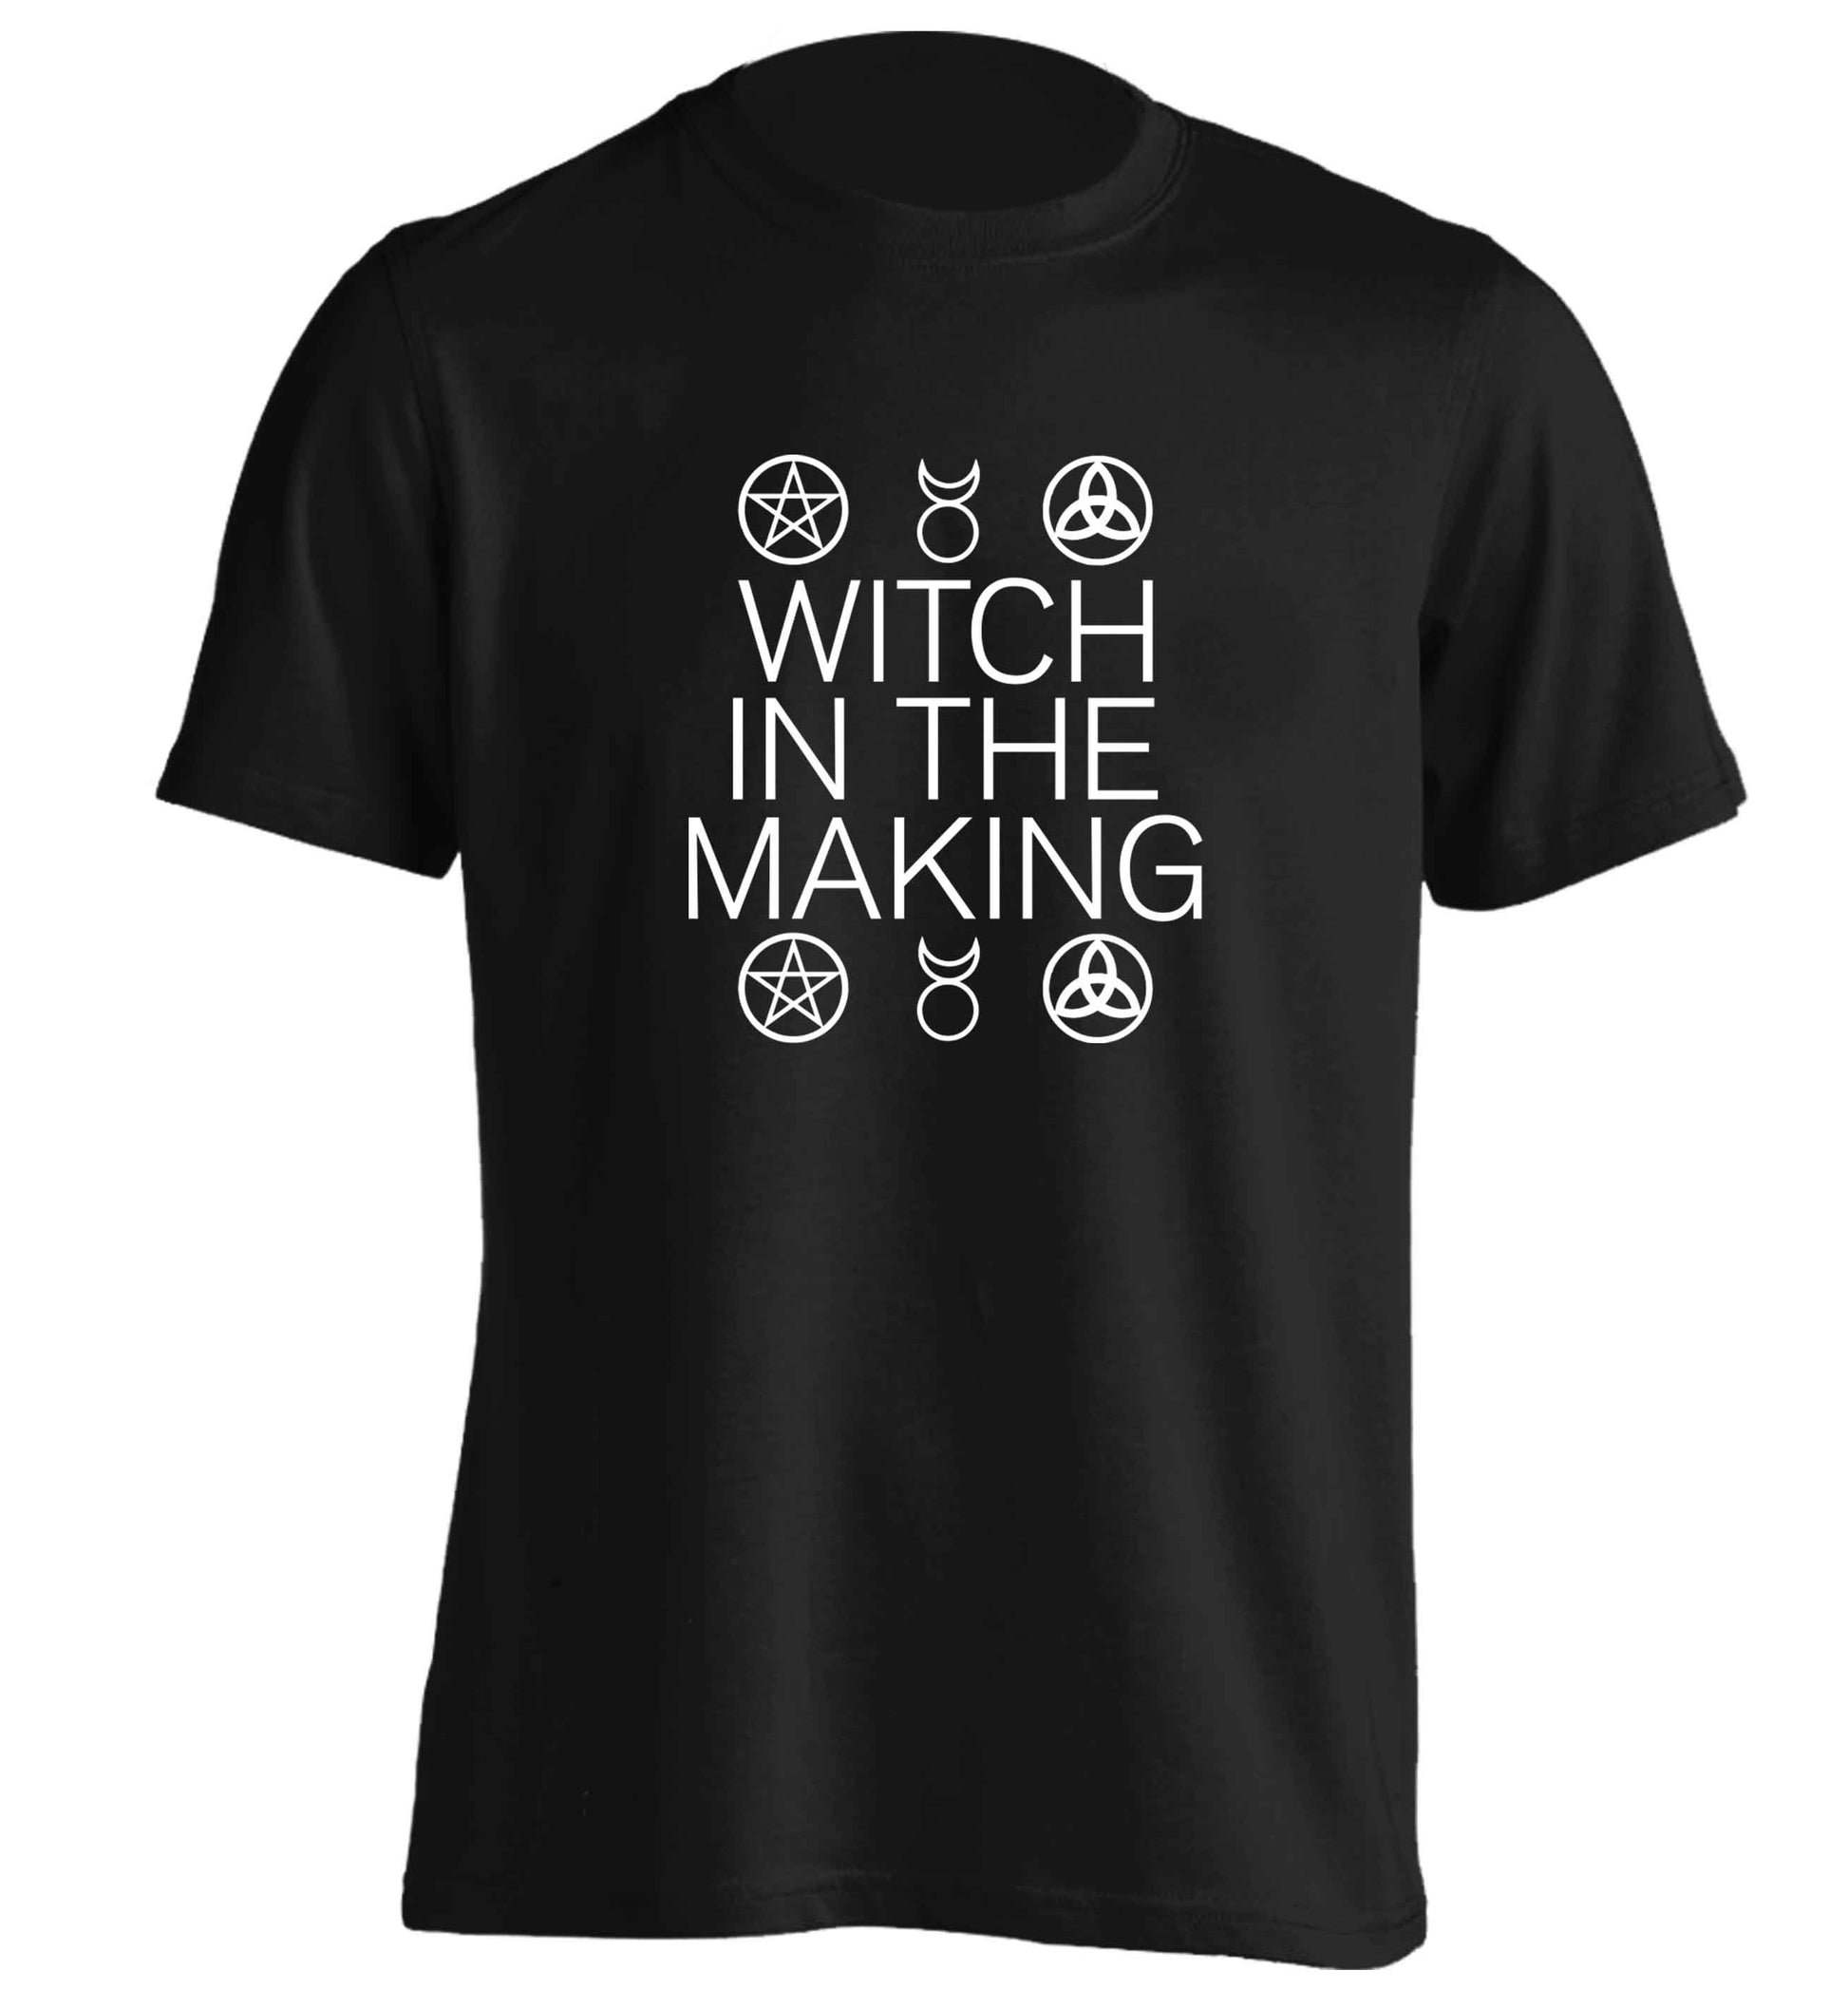 Witch in the making adults unisex black Tshirt 2XL